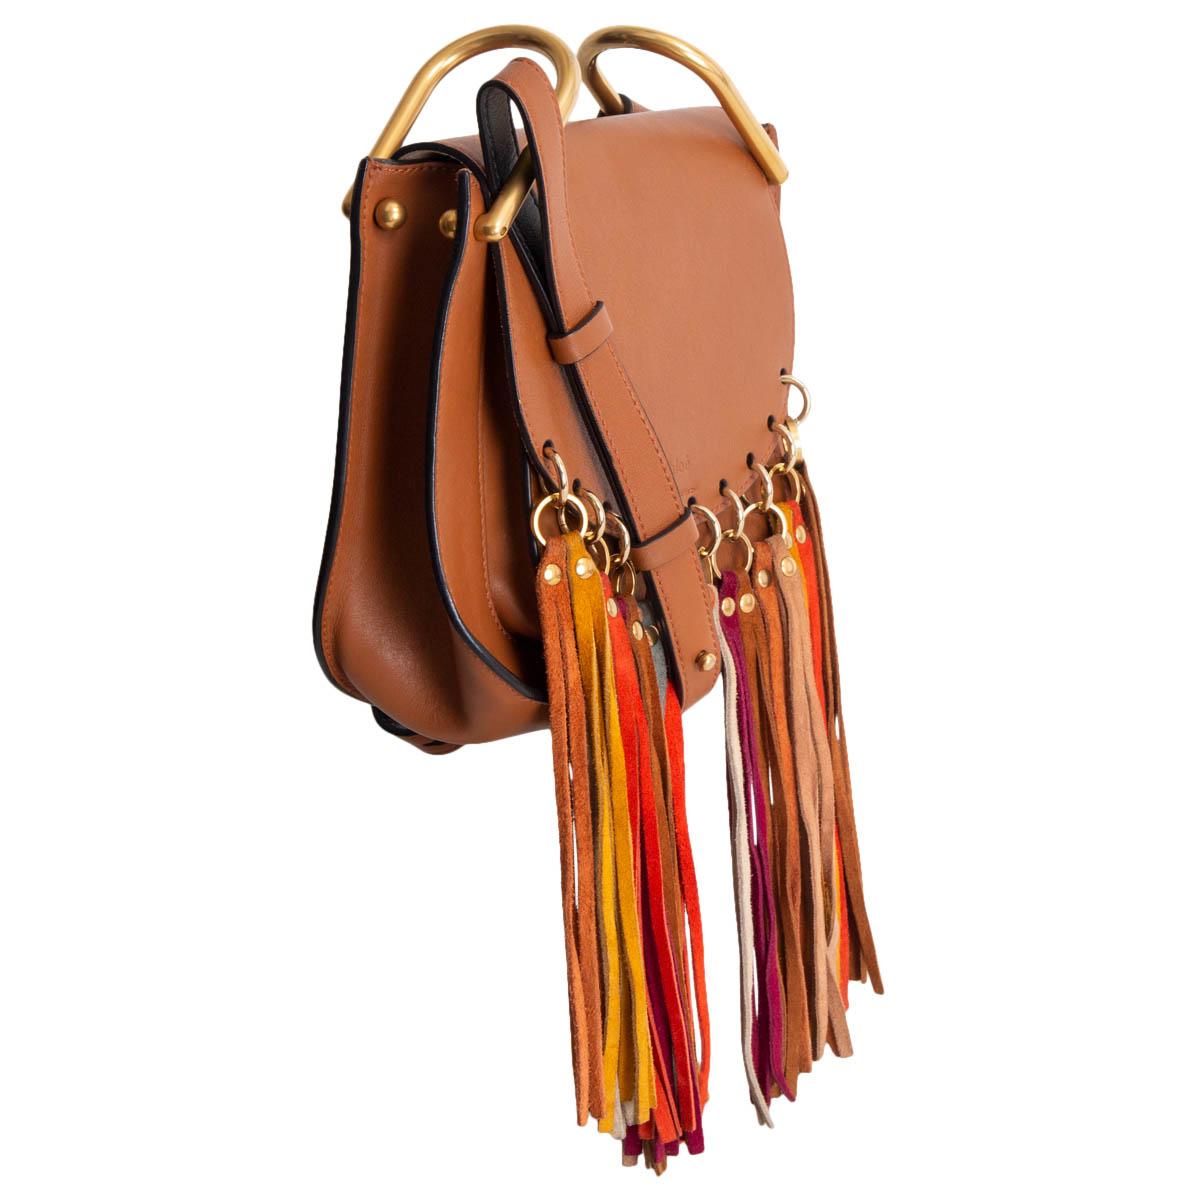 100% authentic Chloé Fringe Hudson Small Shoulder Bag in coganc brown calfskin embellished with multicolor fringes and gold-tone metal rings. Opens with a magnetic button under the flap to a beige suede interior with one open pocket against the back